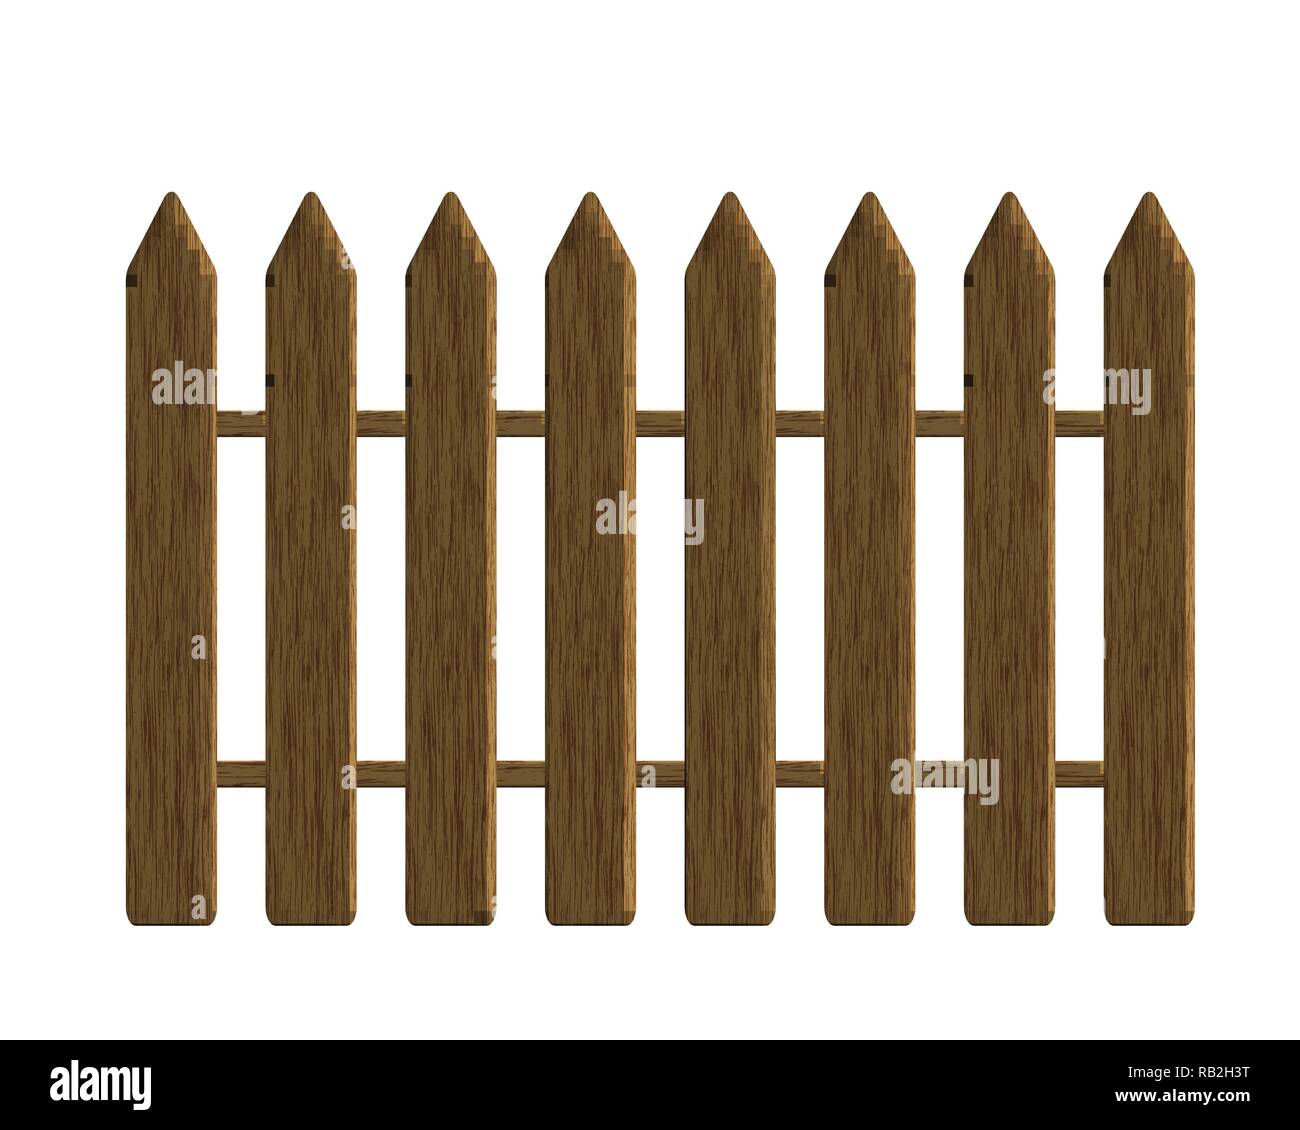 Realistic illustration of a wooden fence made of boards with textured wood, isolated on a white background - vector Stock Vector